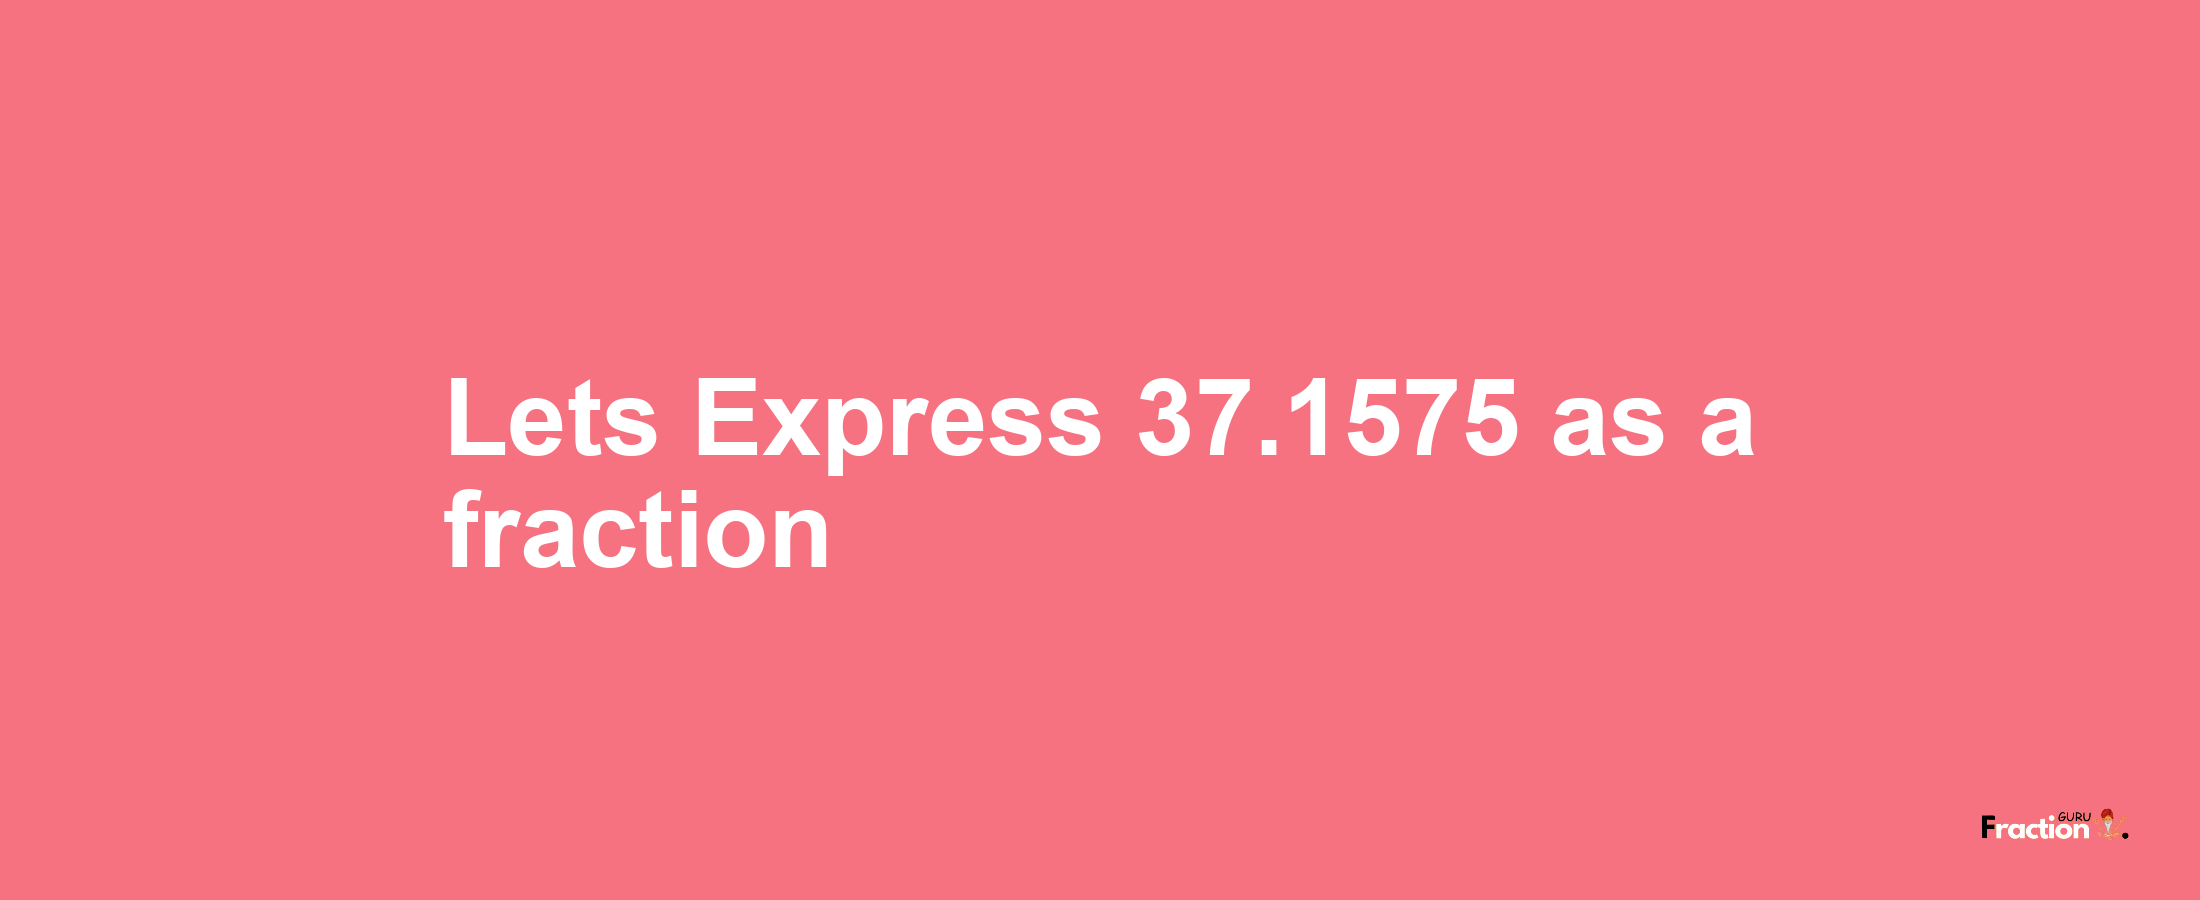 Lets Express 37.1575 as afraction